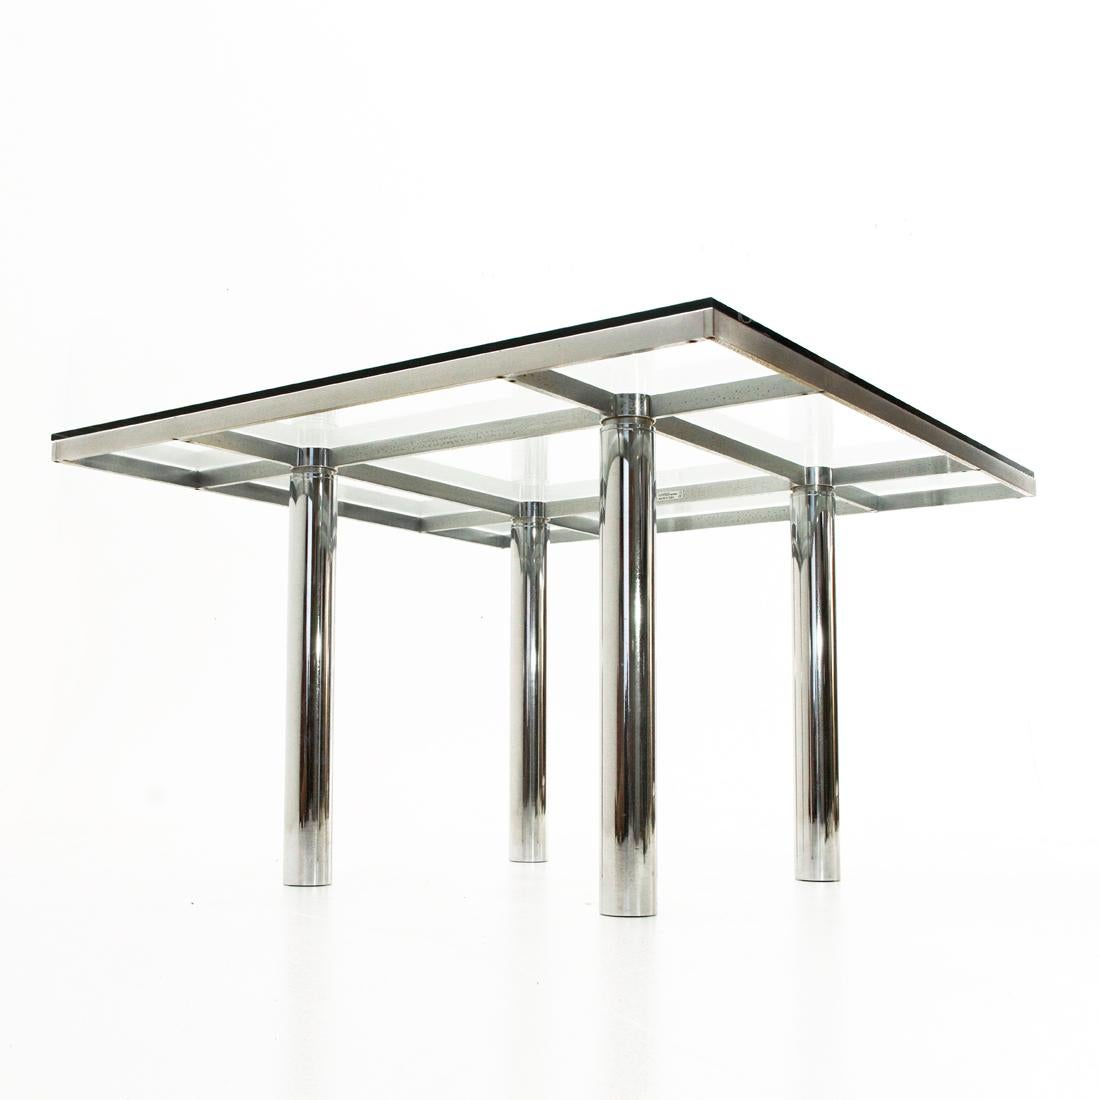 Mid-20th Century Andrè Square Dining Table by Tobia Scarpa for Gavina